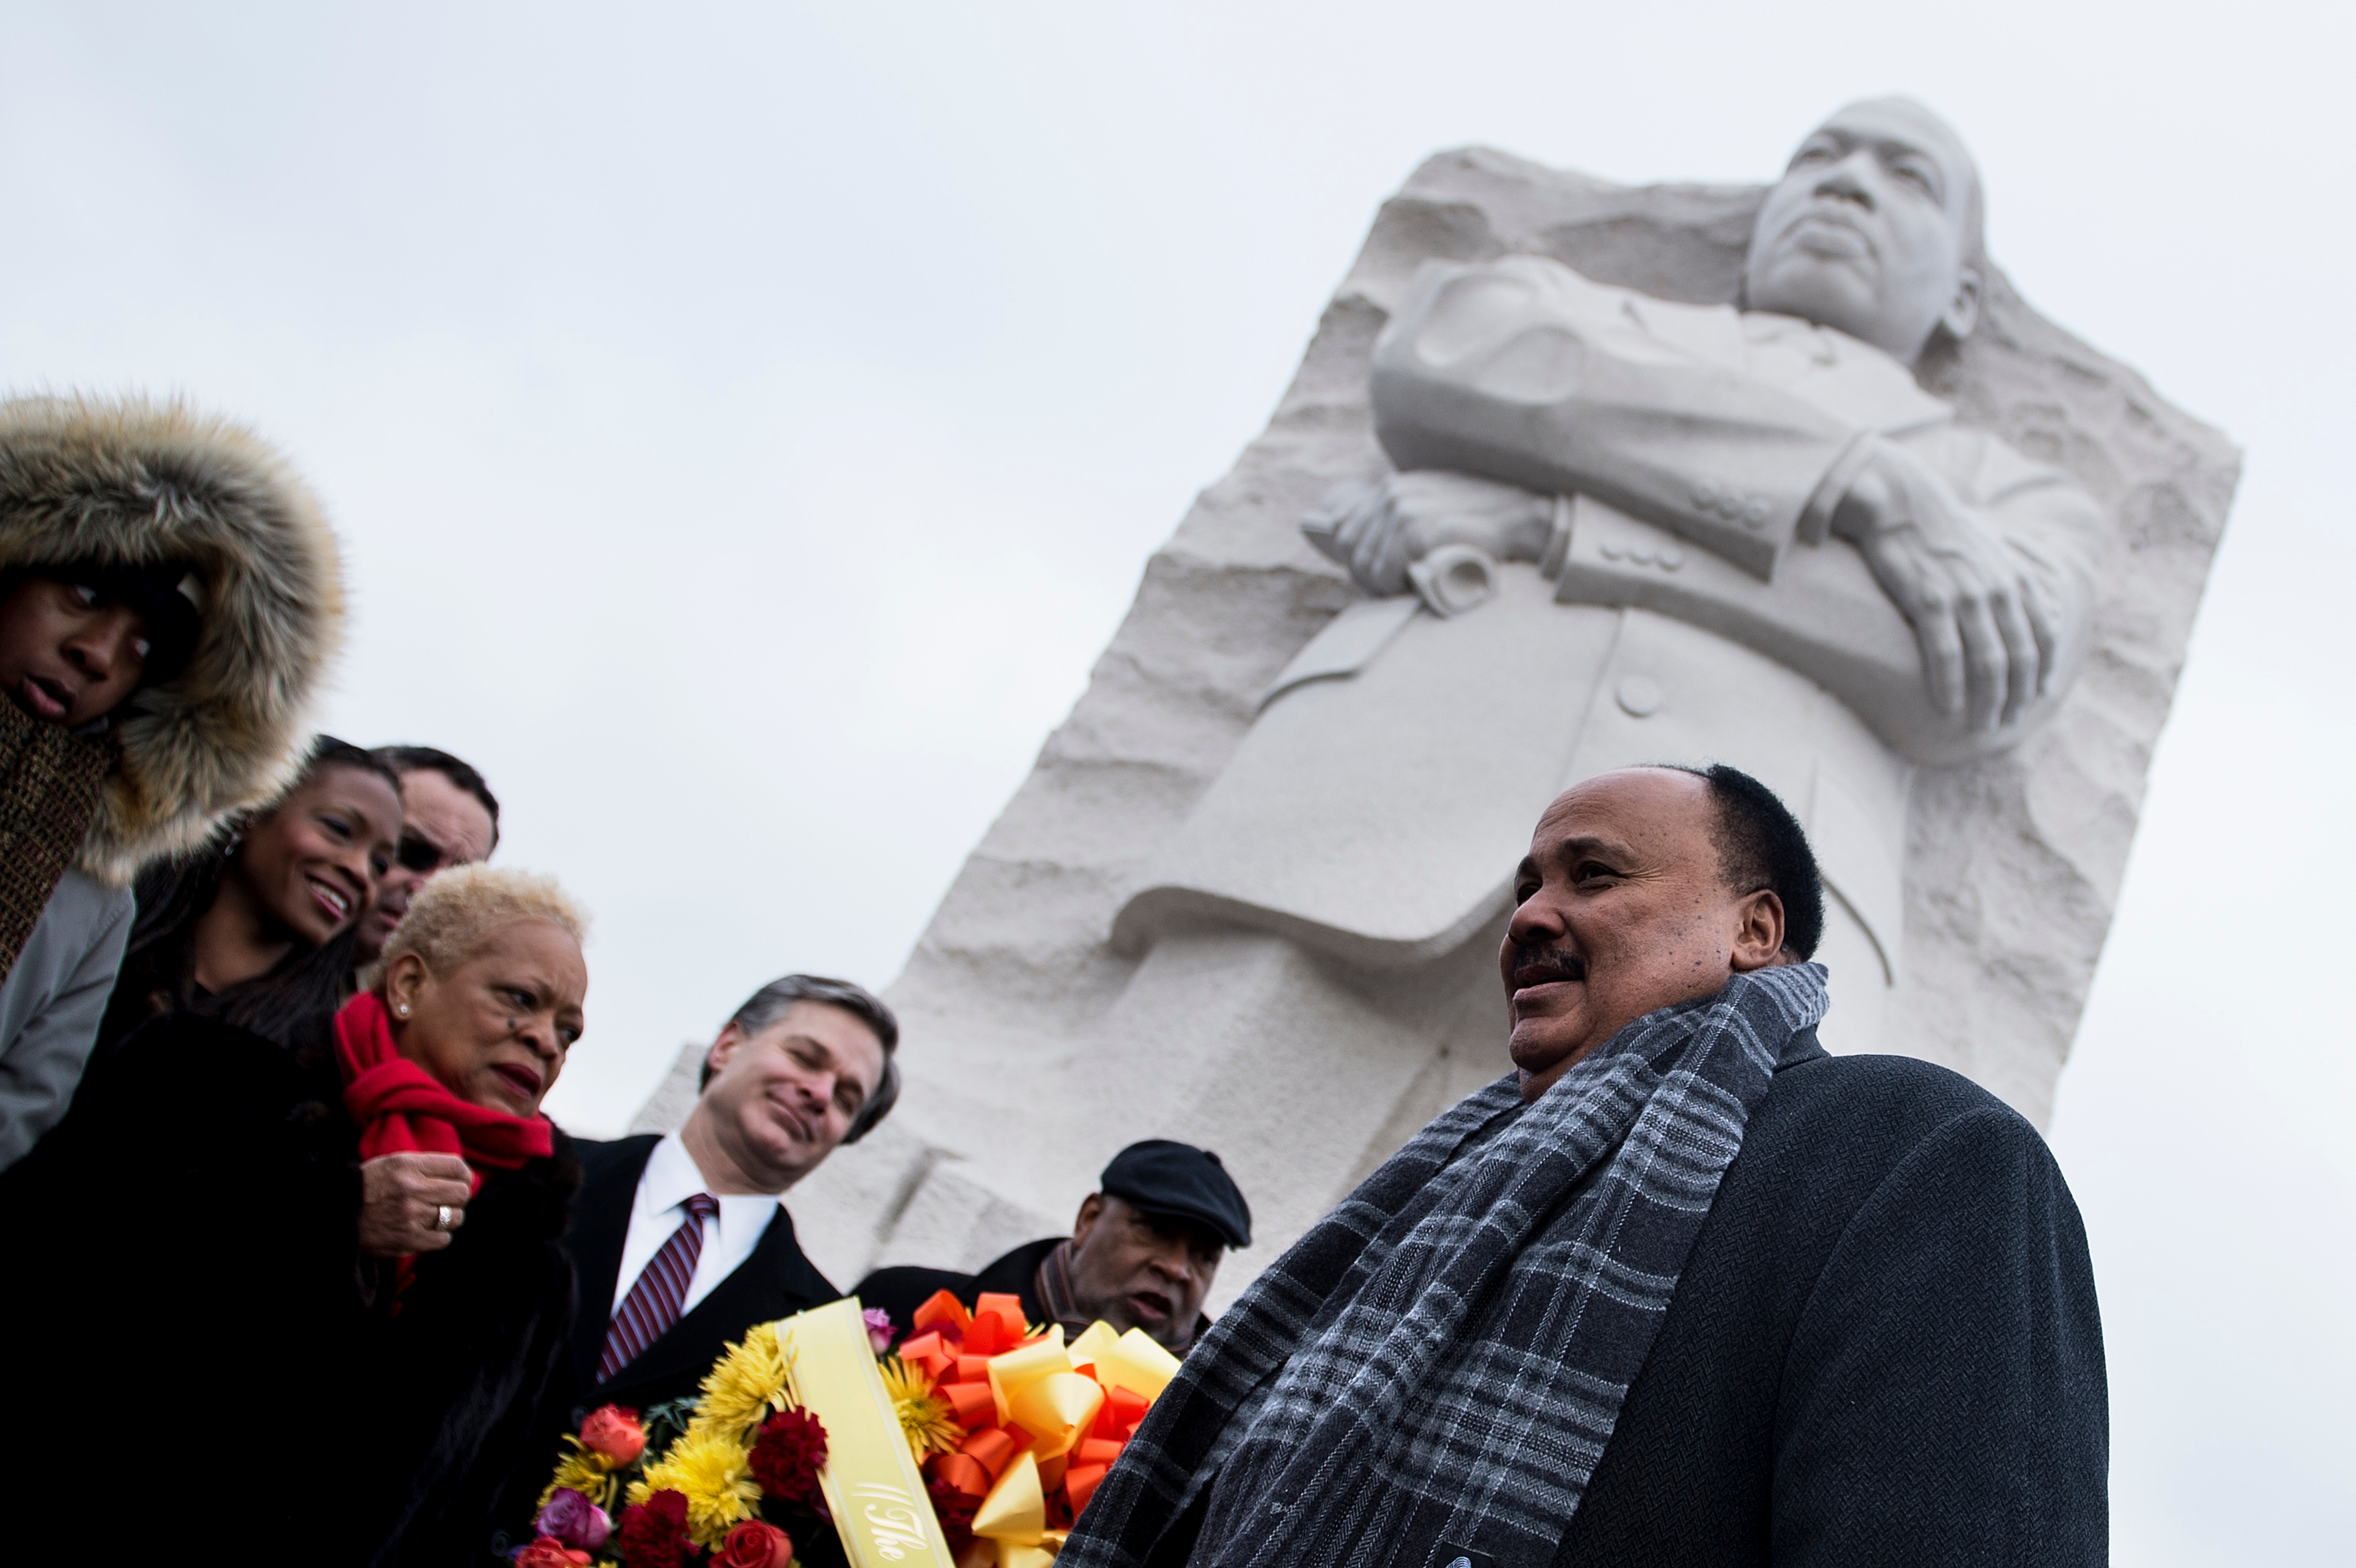 Martin Luther King III speaks in front of the MLK memorial